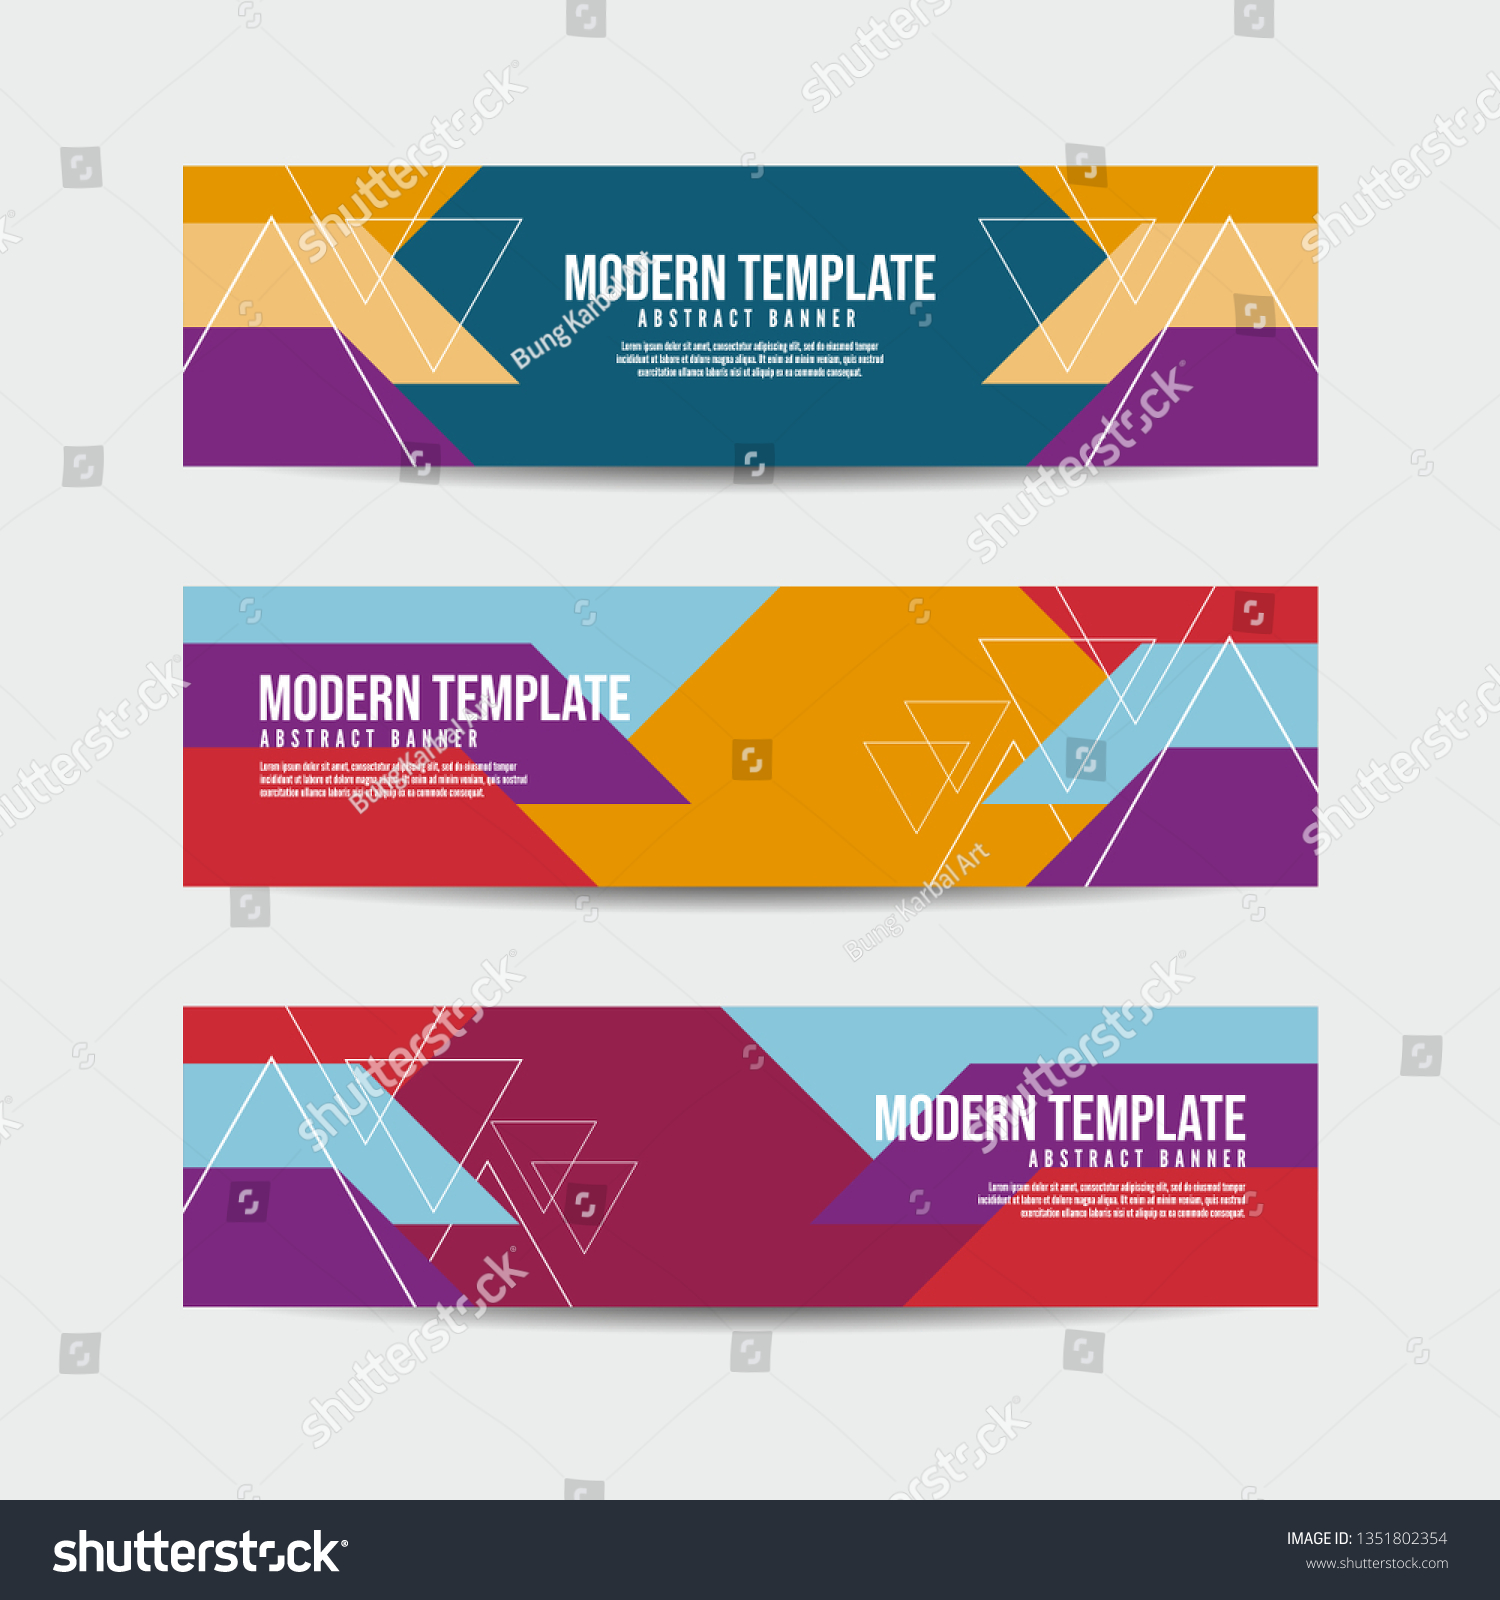 Collection 3 Modern Flat Abstract Web Stock Vector Royalty Free